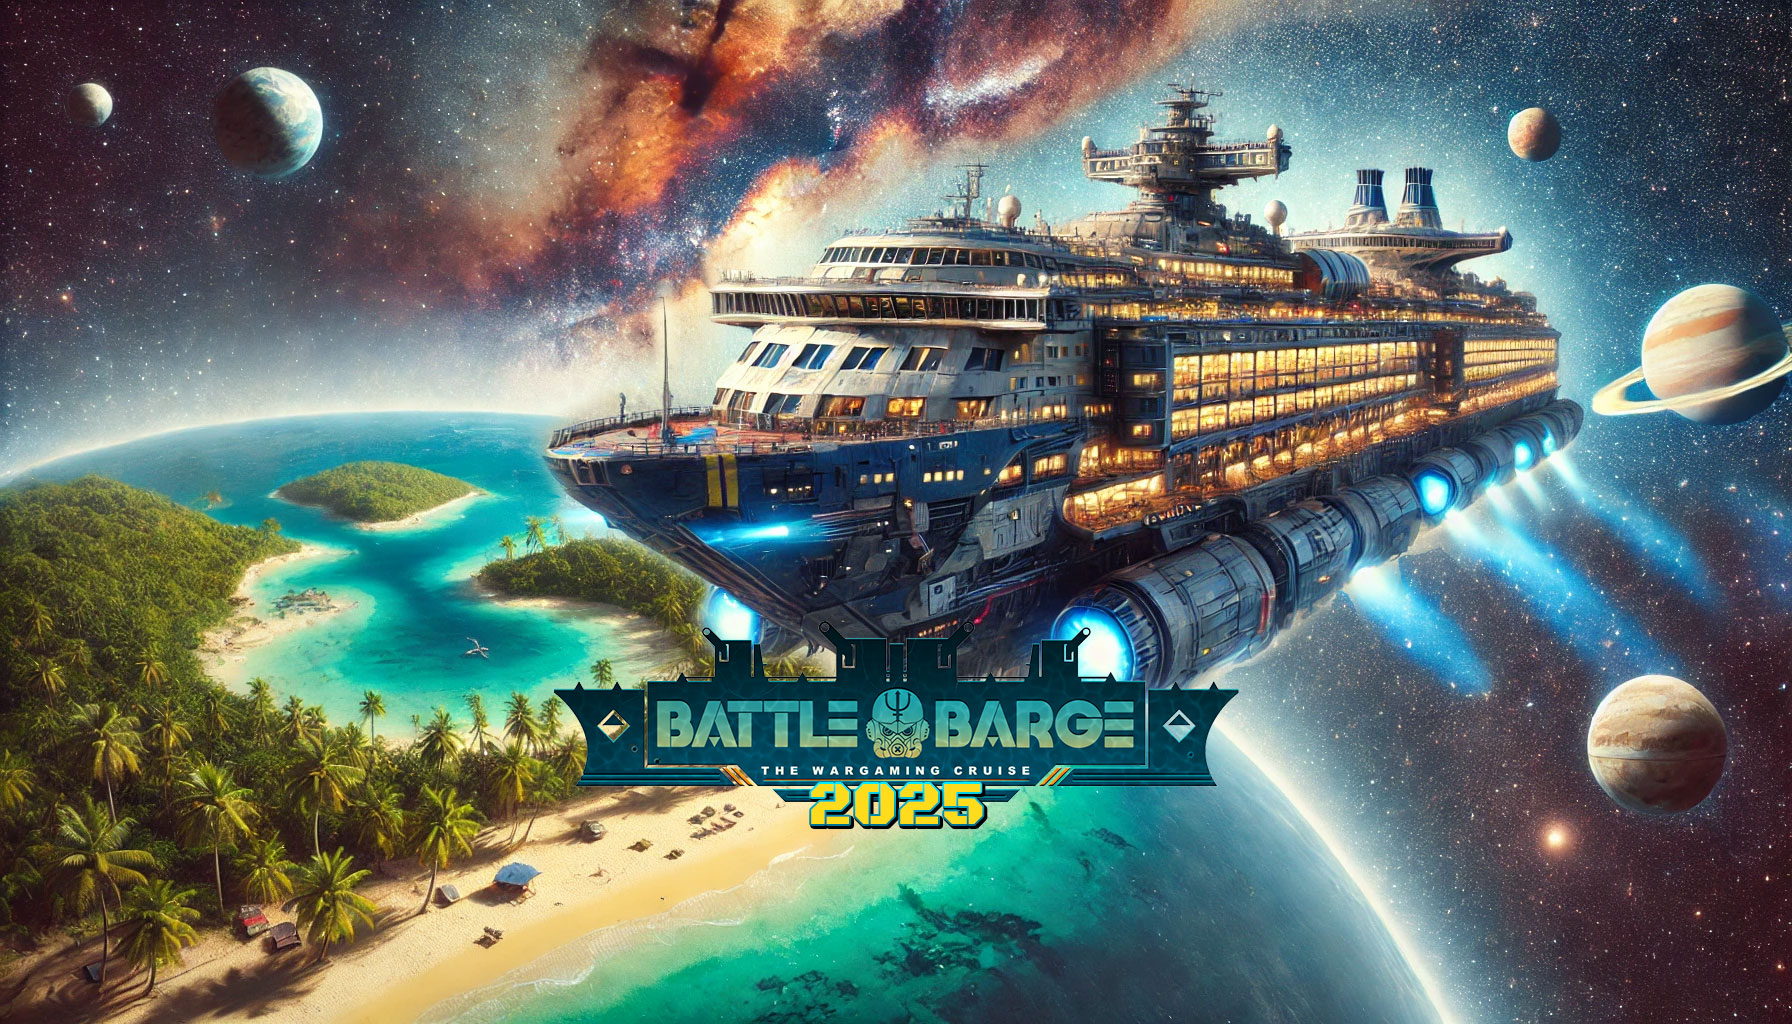 battle barge cruise vacation starship approach tropical planet wargaming warhammer 40k